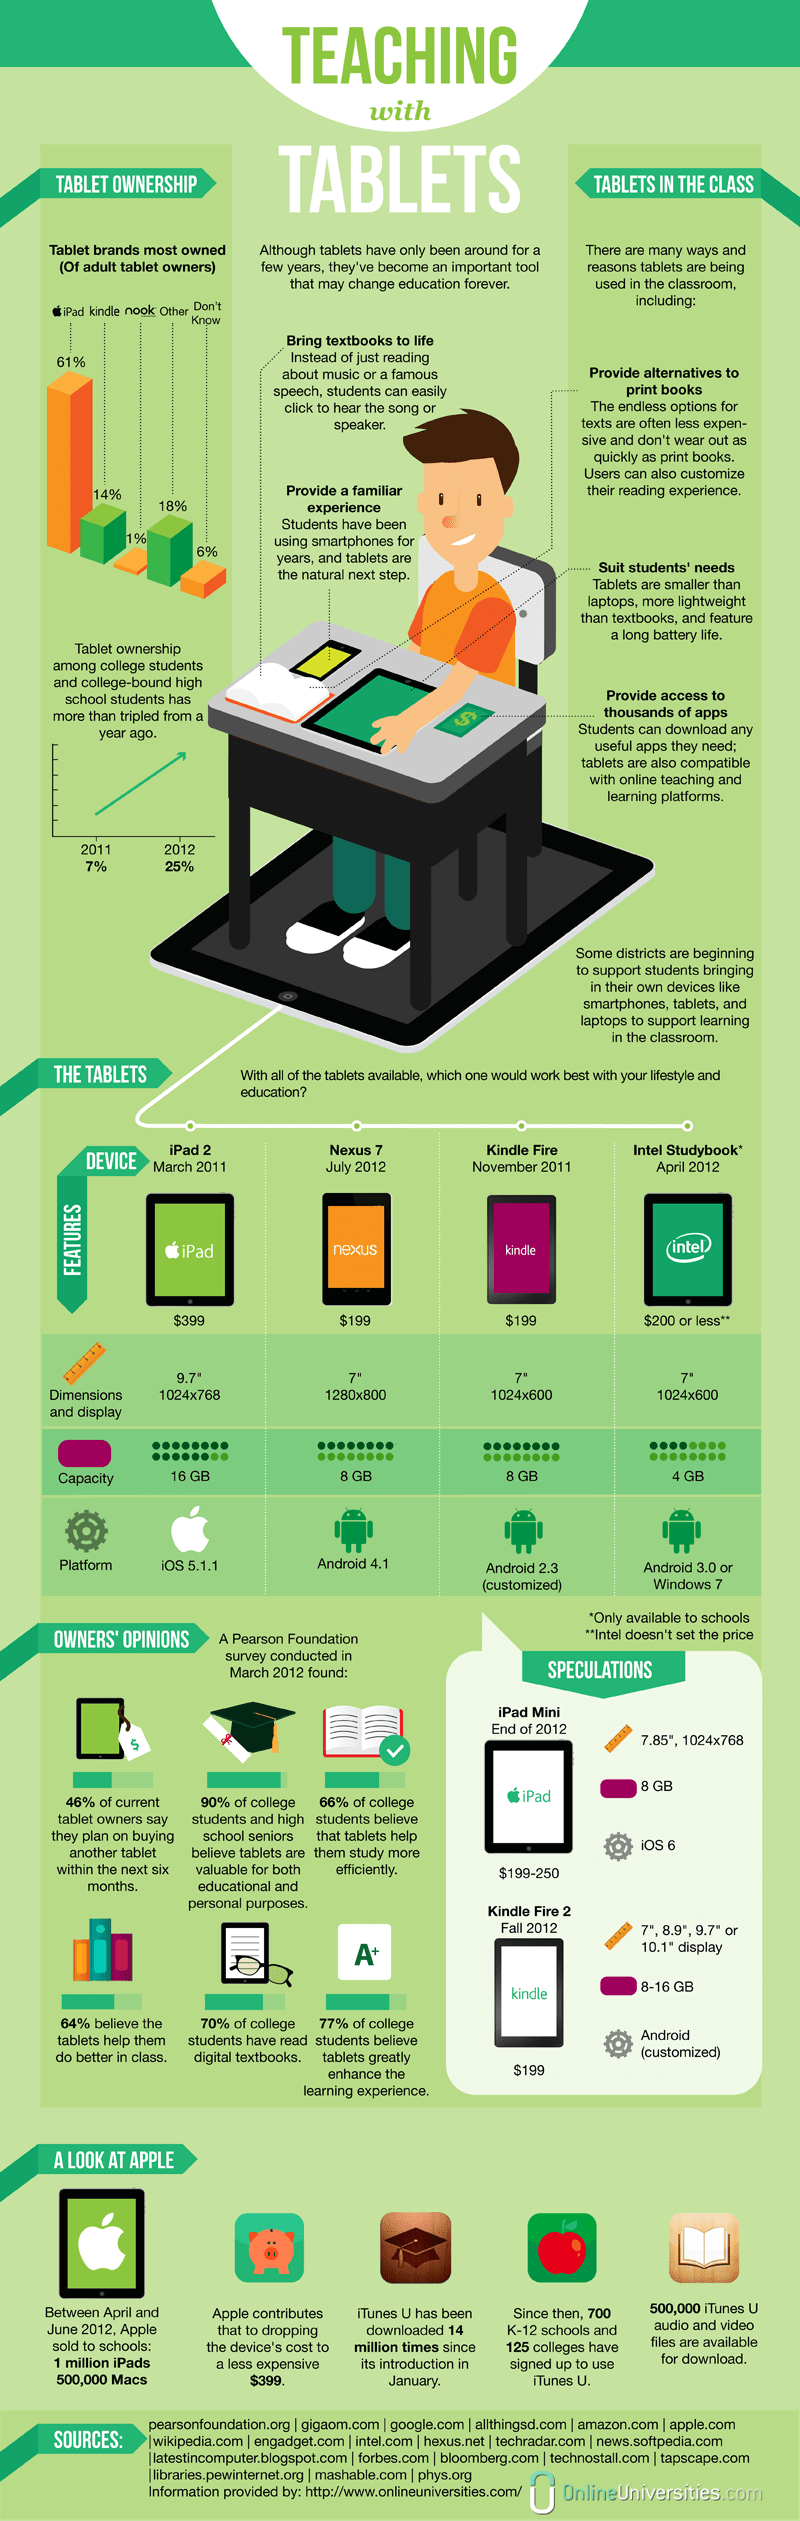 Teaching with Tablets infographic